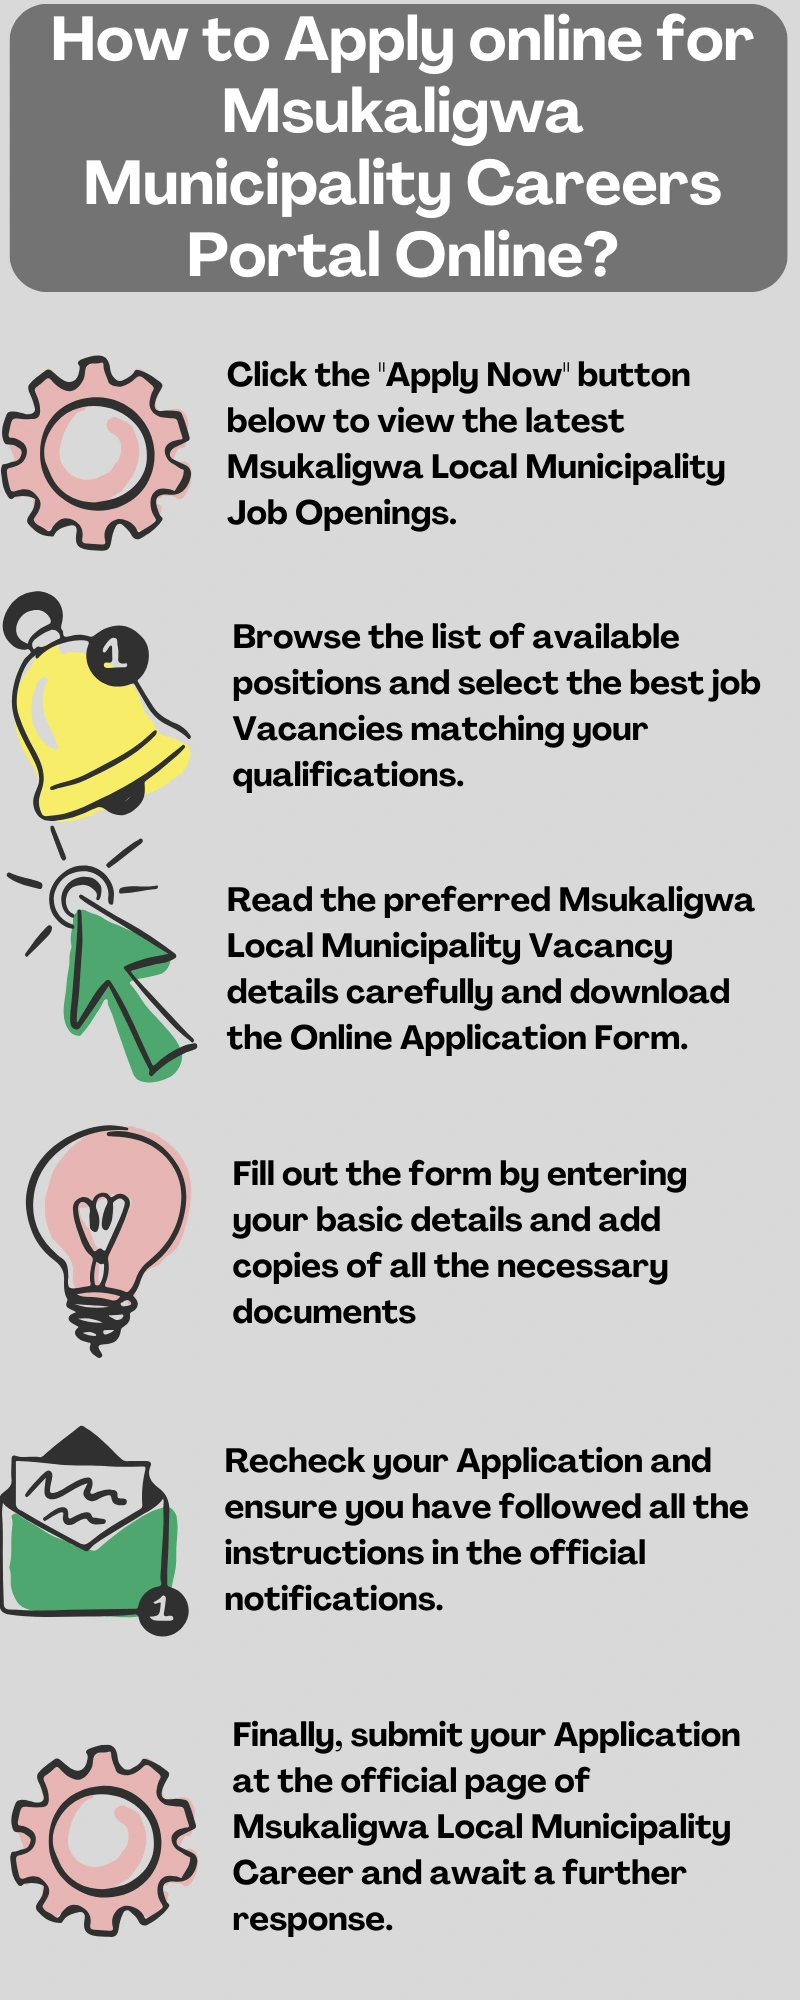 How to Apply online for Msukaligwa Municipality Careers Portal Online?